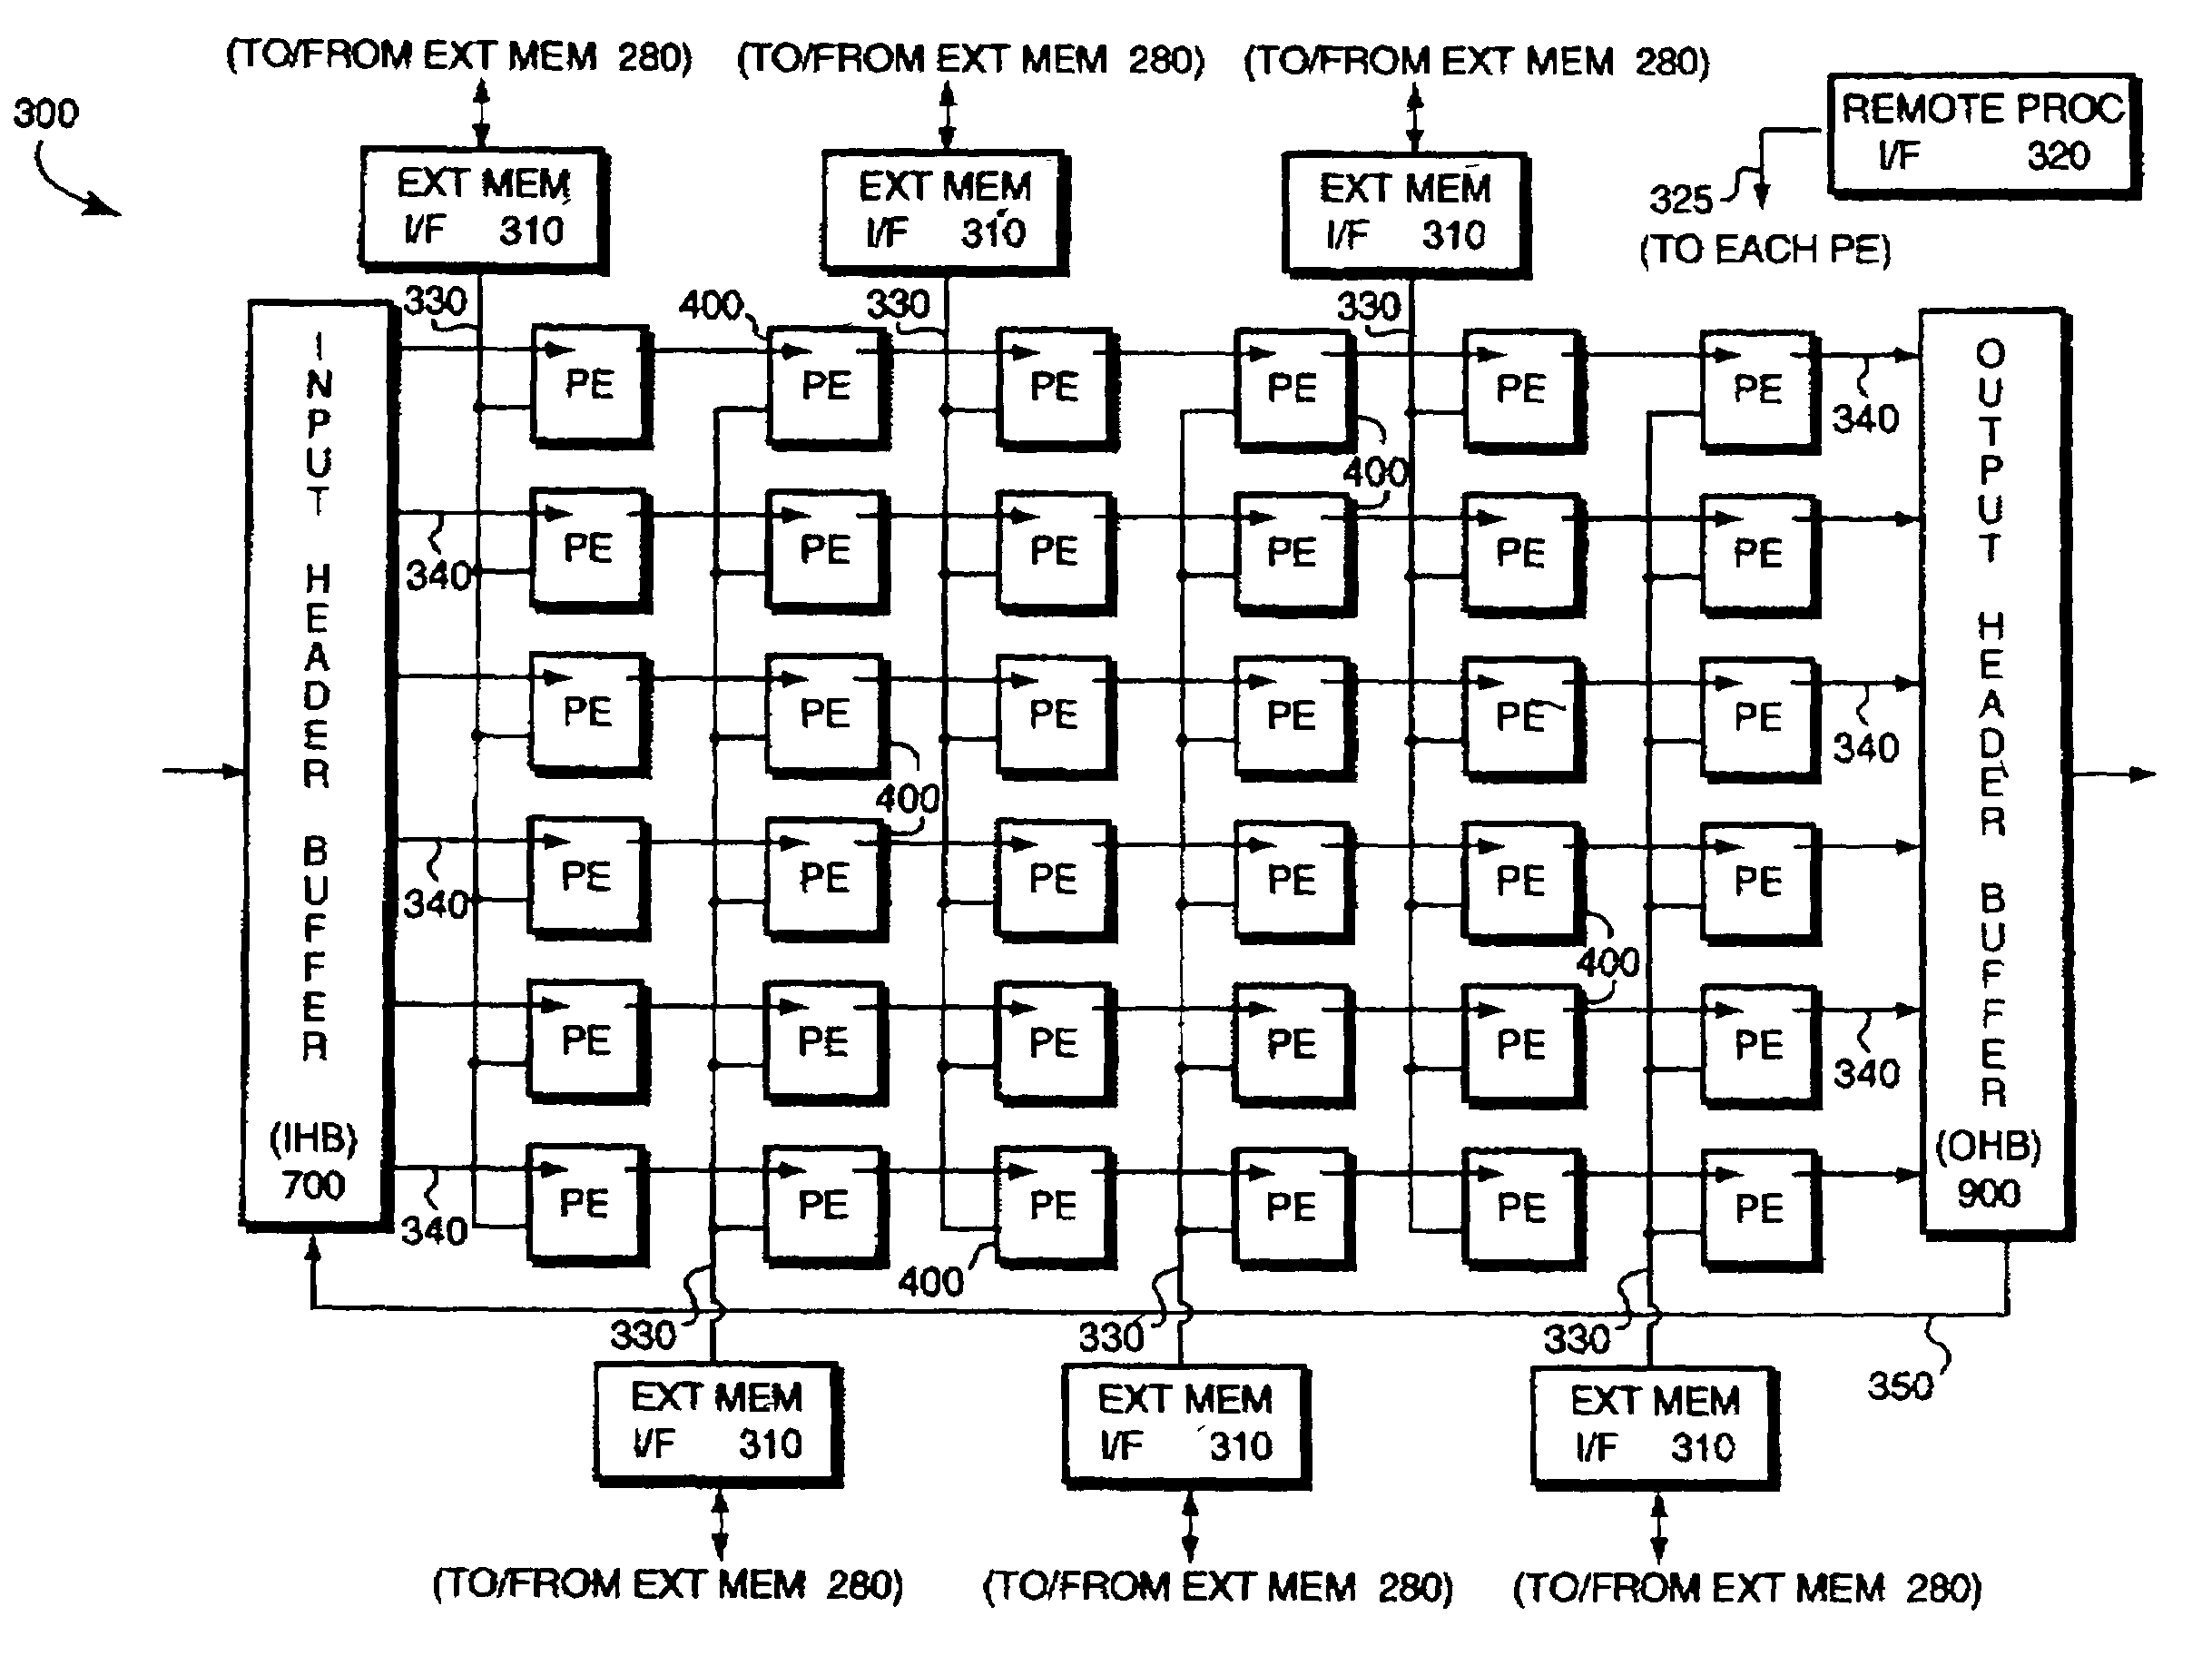 Programmable arrayed processing engine architecture for a network switch